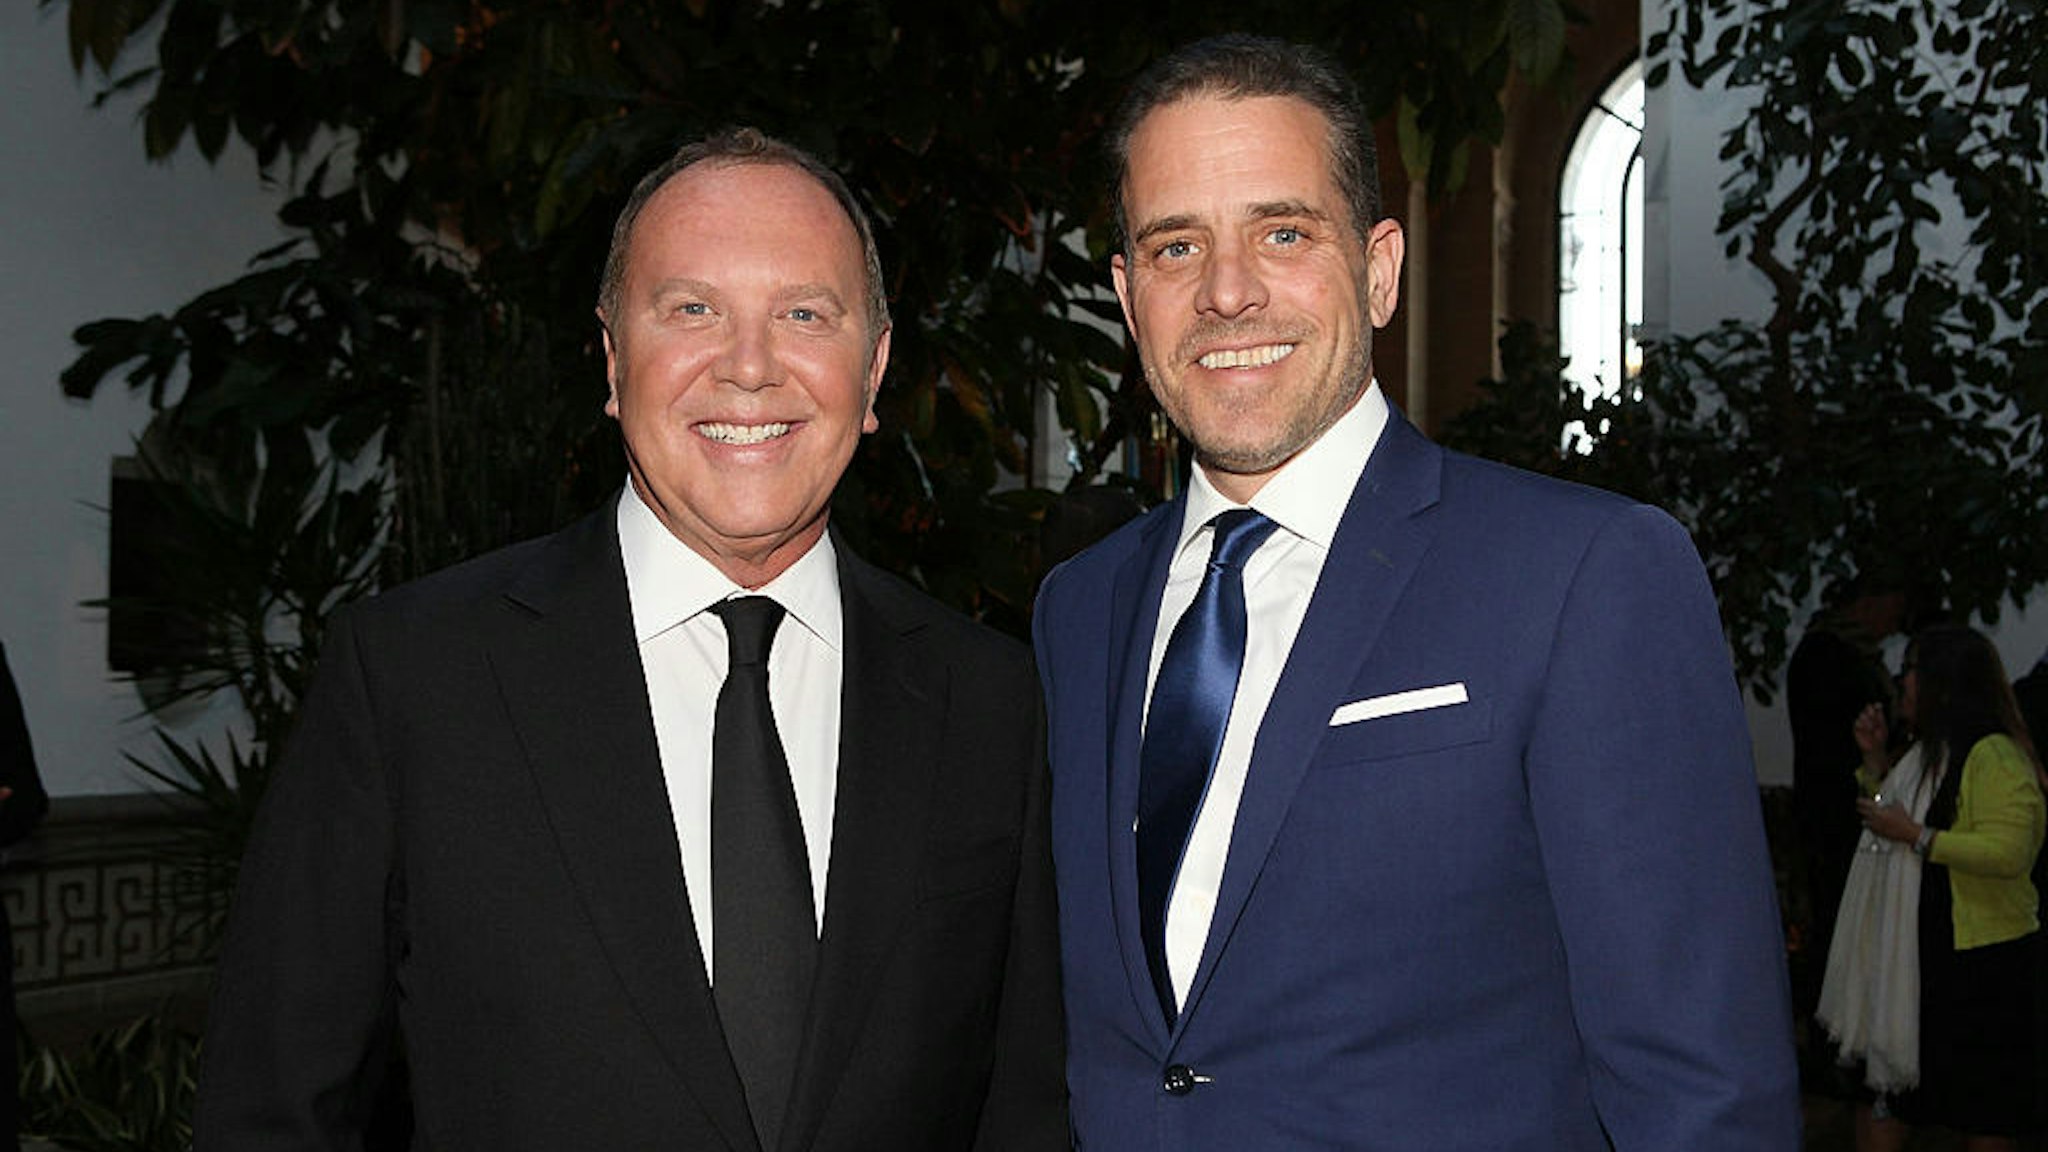 WASHINGTON, DC - APRIL 12: Designer Michael Kors (L) and World Food Program USA Board Chairman Hunter Biden attend the World Food Program USA's Annual McGovern-Dole Leadership Award Ceremony at Organization of American States on April 12, 2016 in Washington, DC. (Photo by Teresa Kroeger/Getty Images for World Food Program USA)